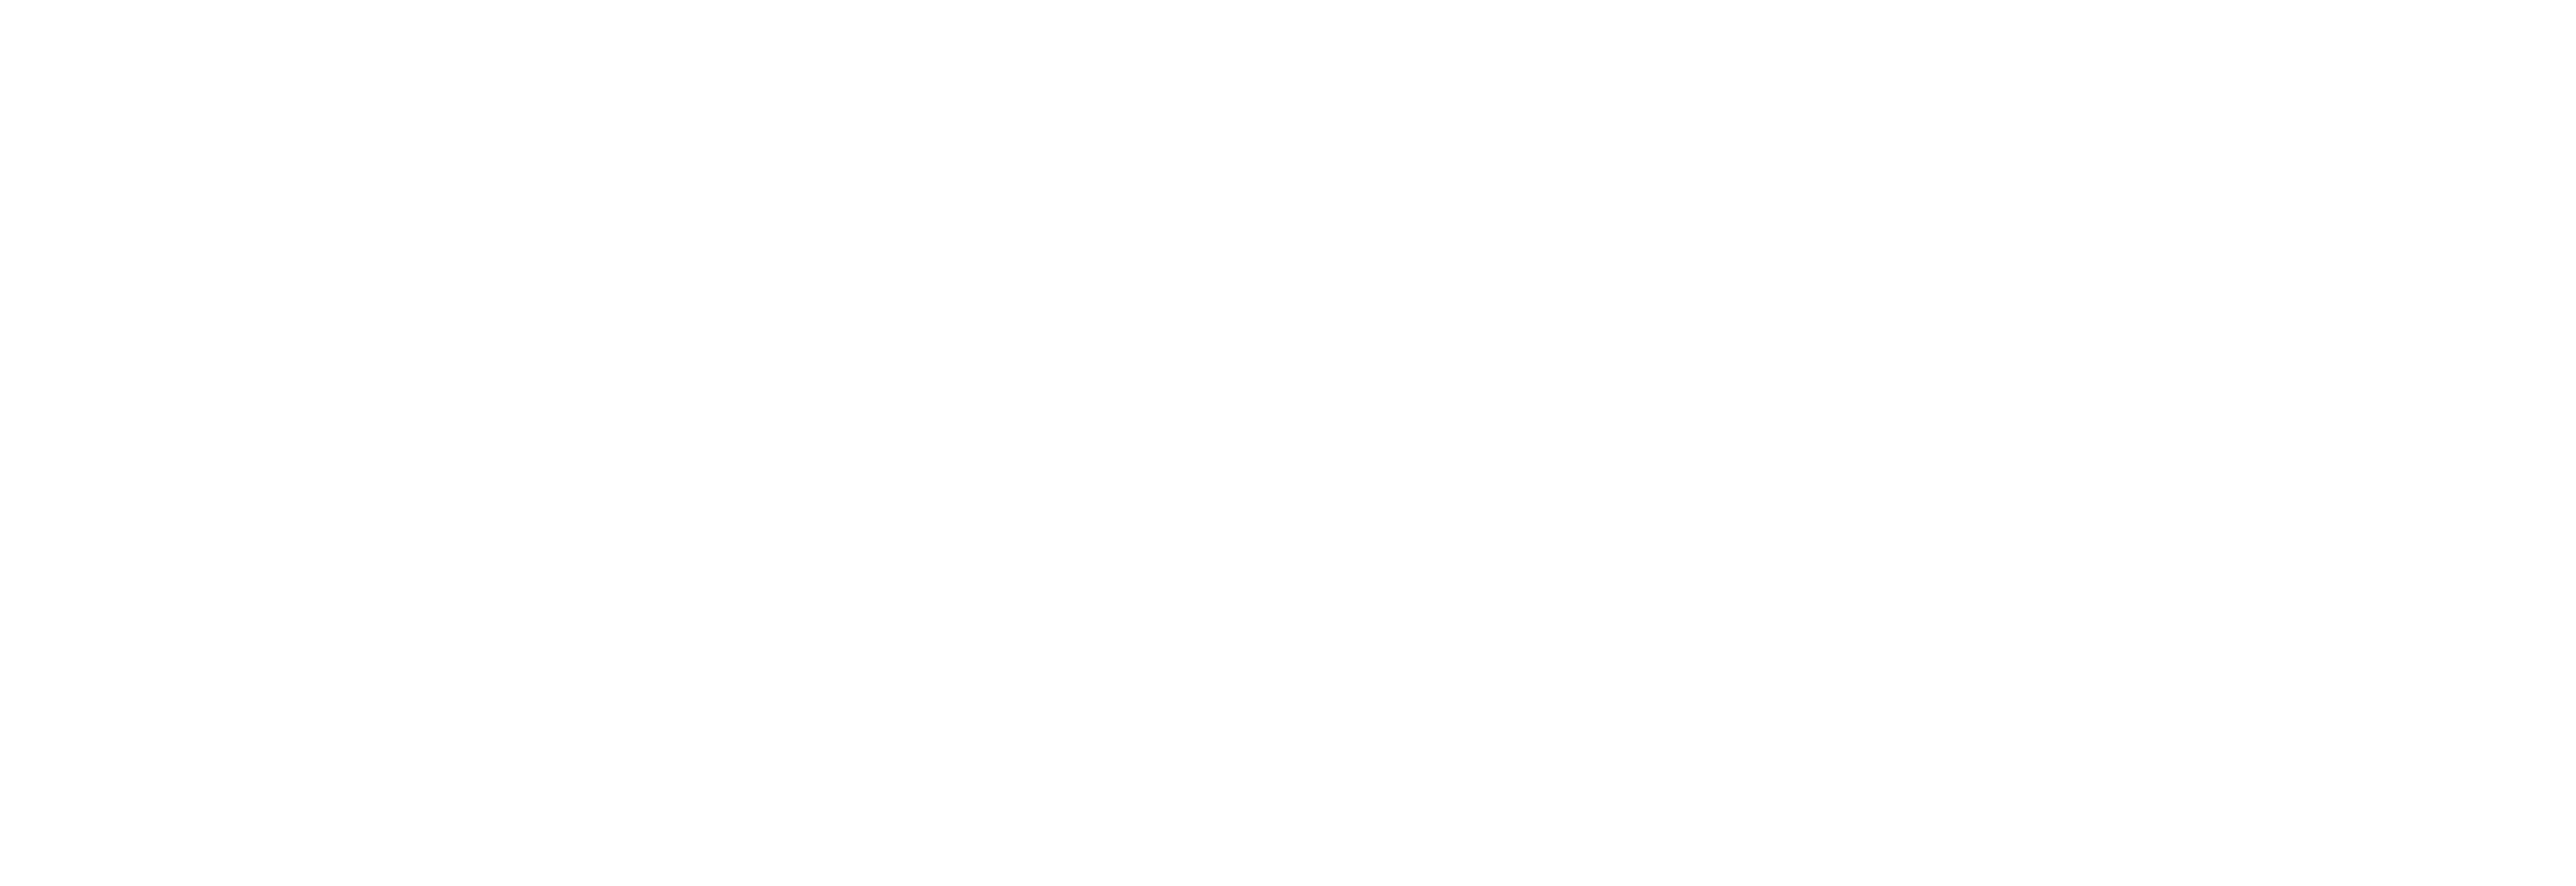 Maggie Simpson in Rogue Not Quite One logo